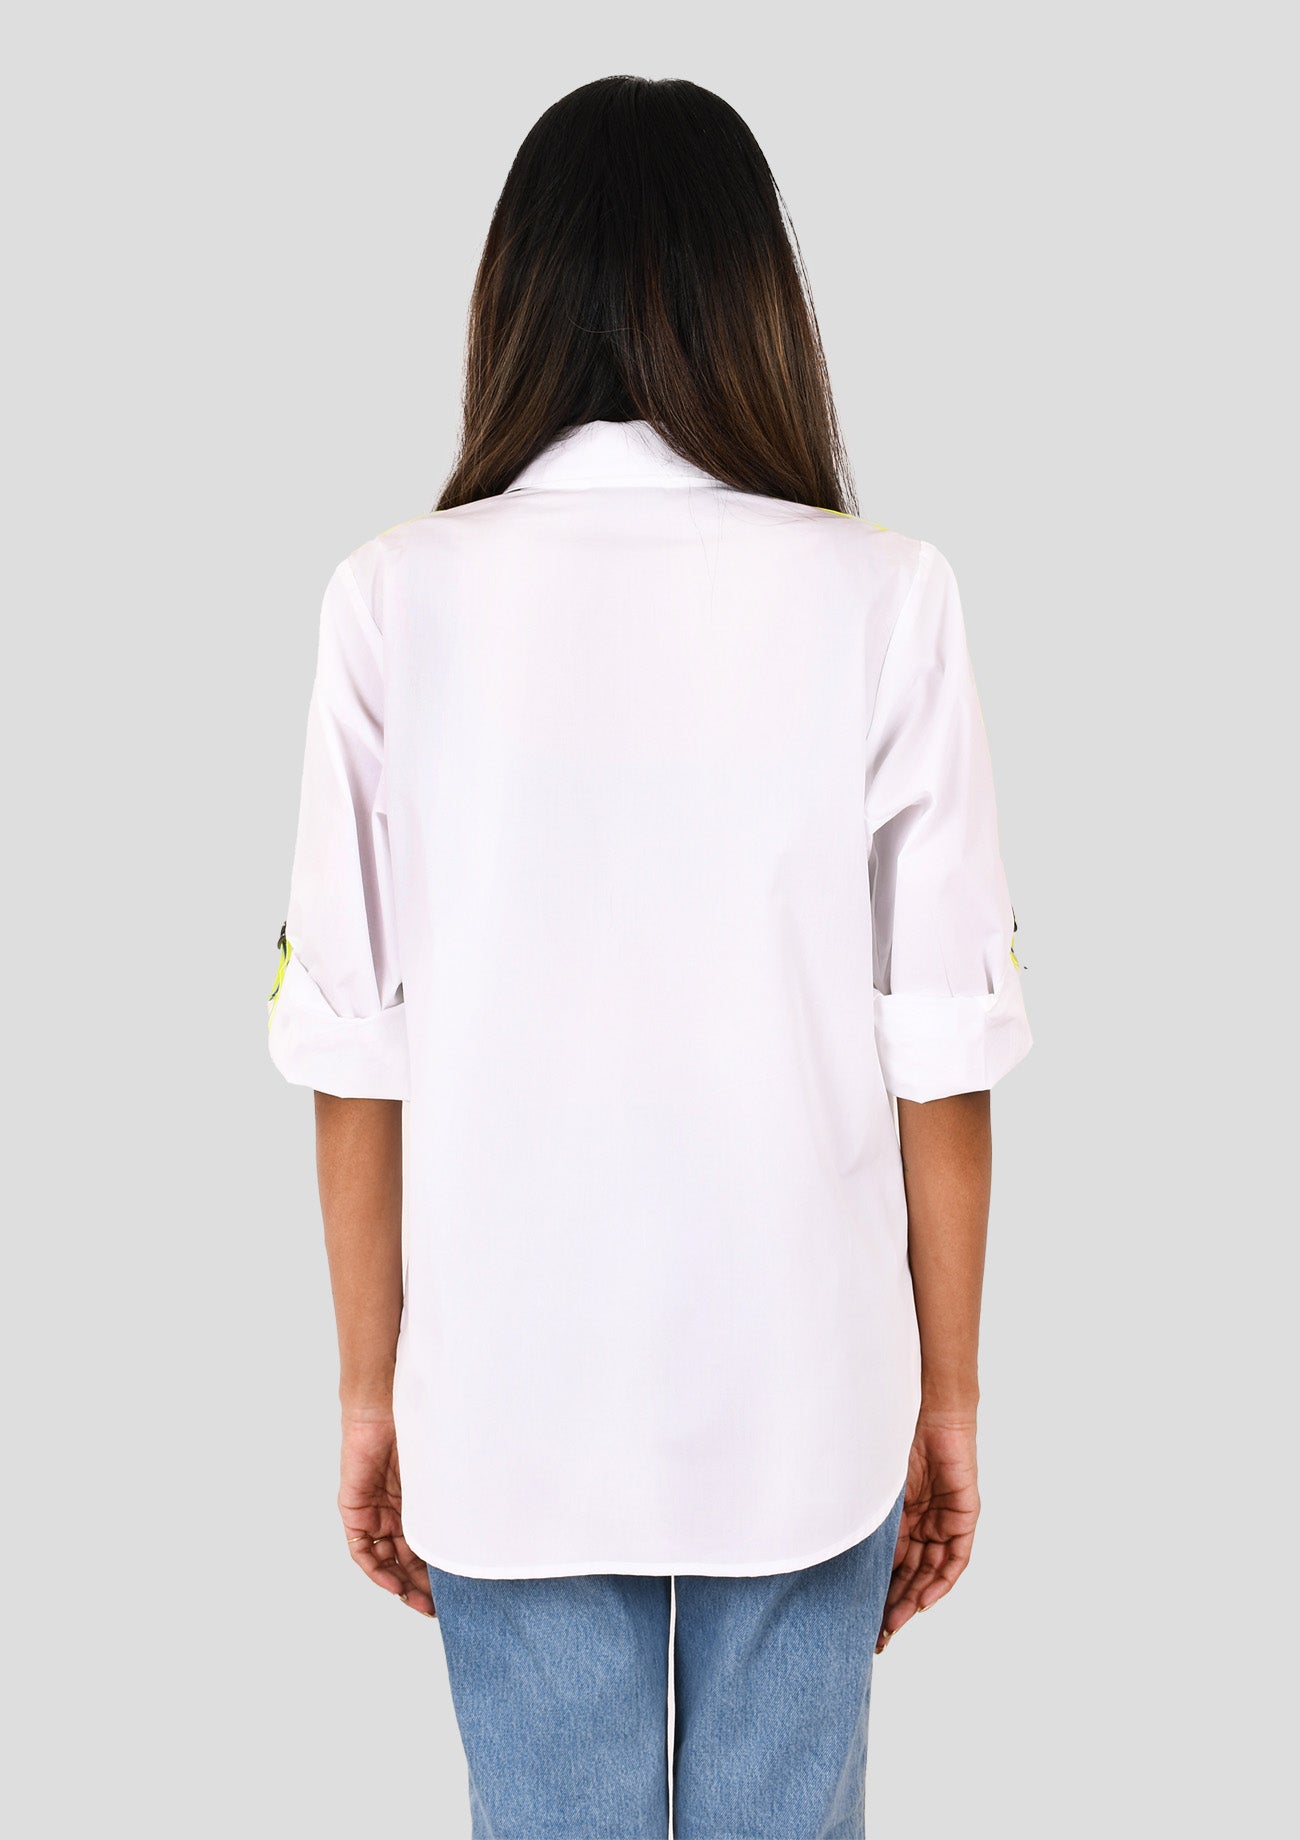 White Cotton Shirt With Slogan Embroidery With Stripe Tape